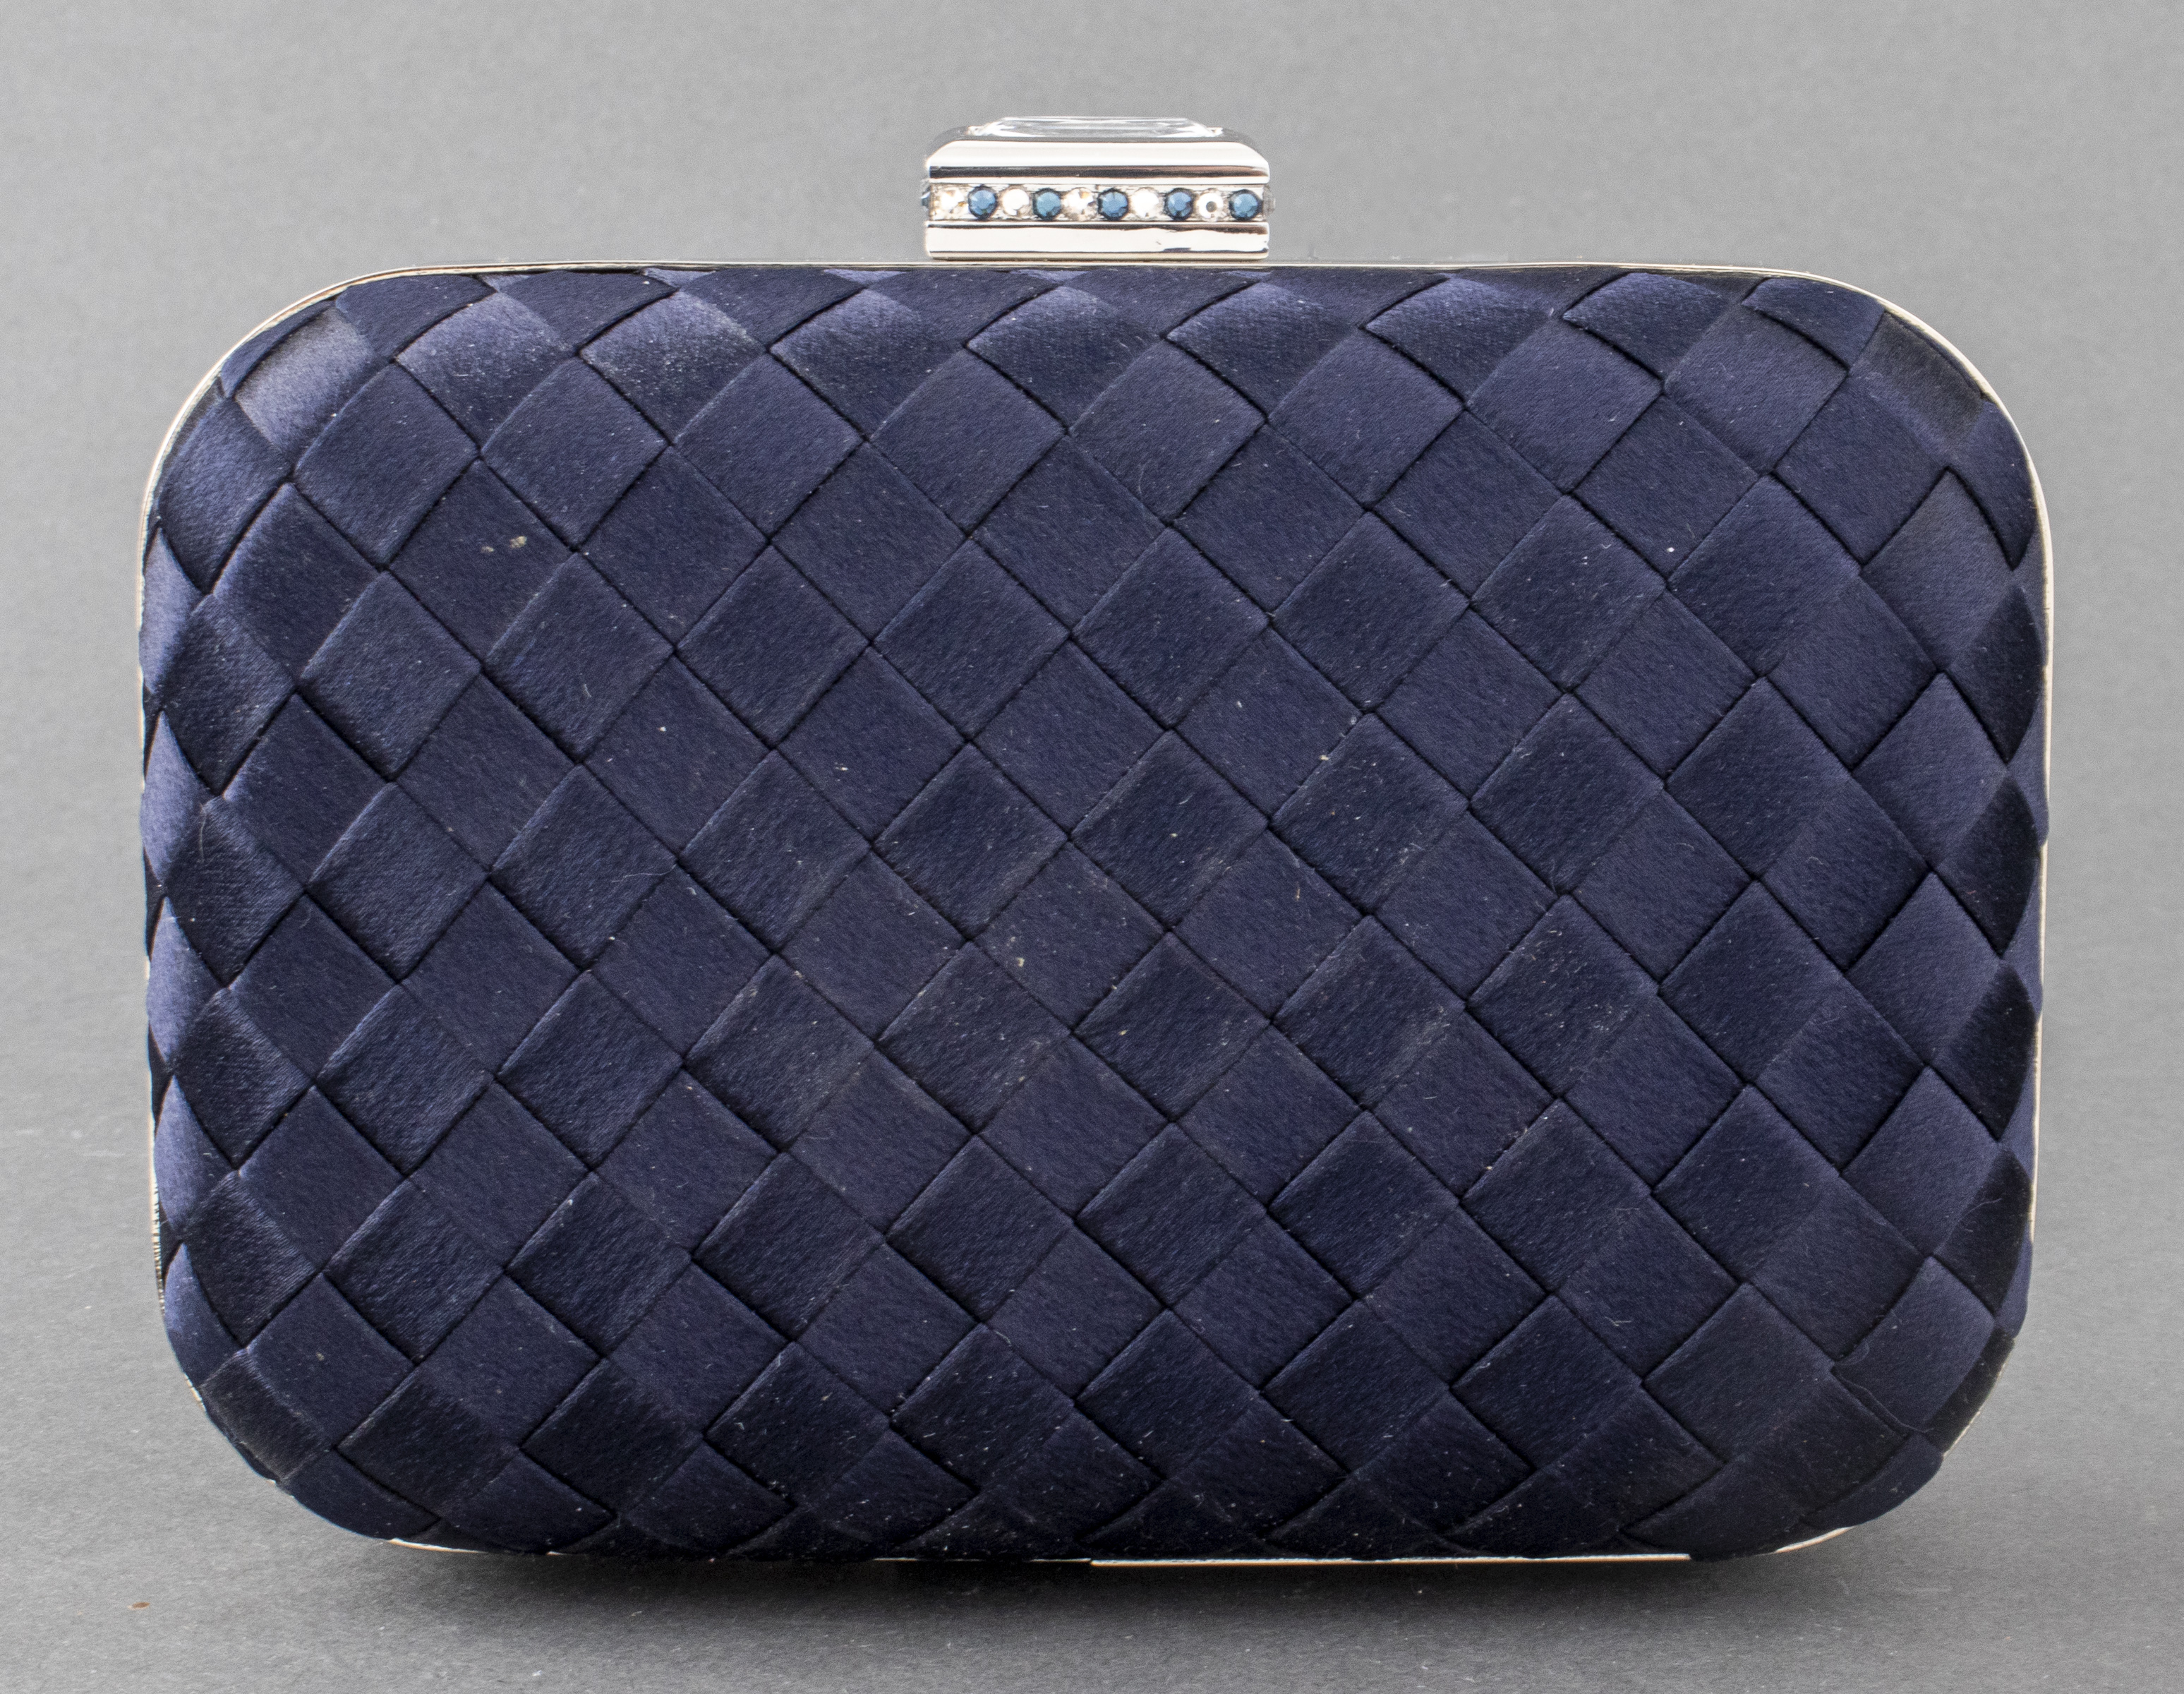 NAVY BLUE WOVEN SATIN CLUTCH with 3c48a7